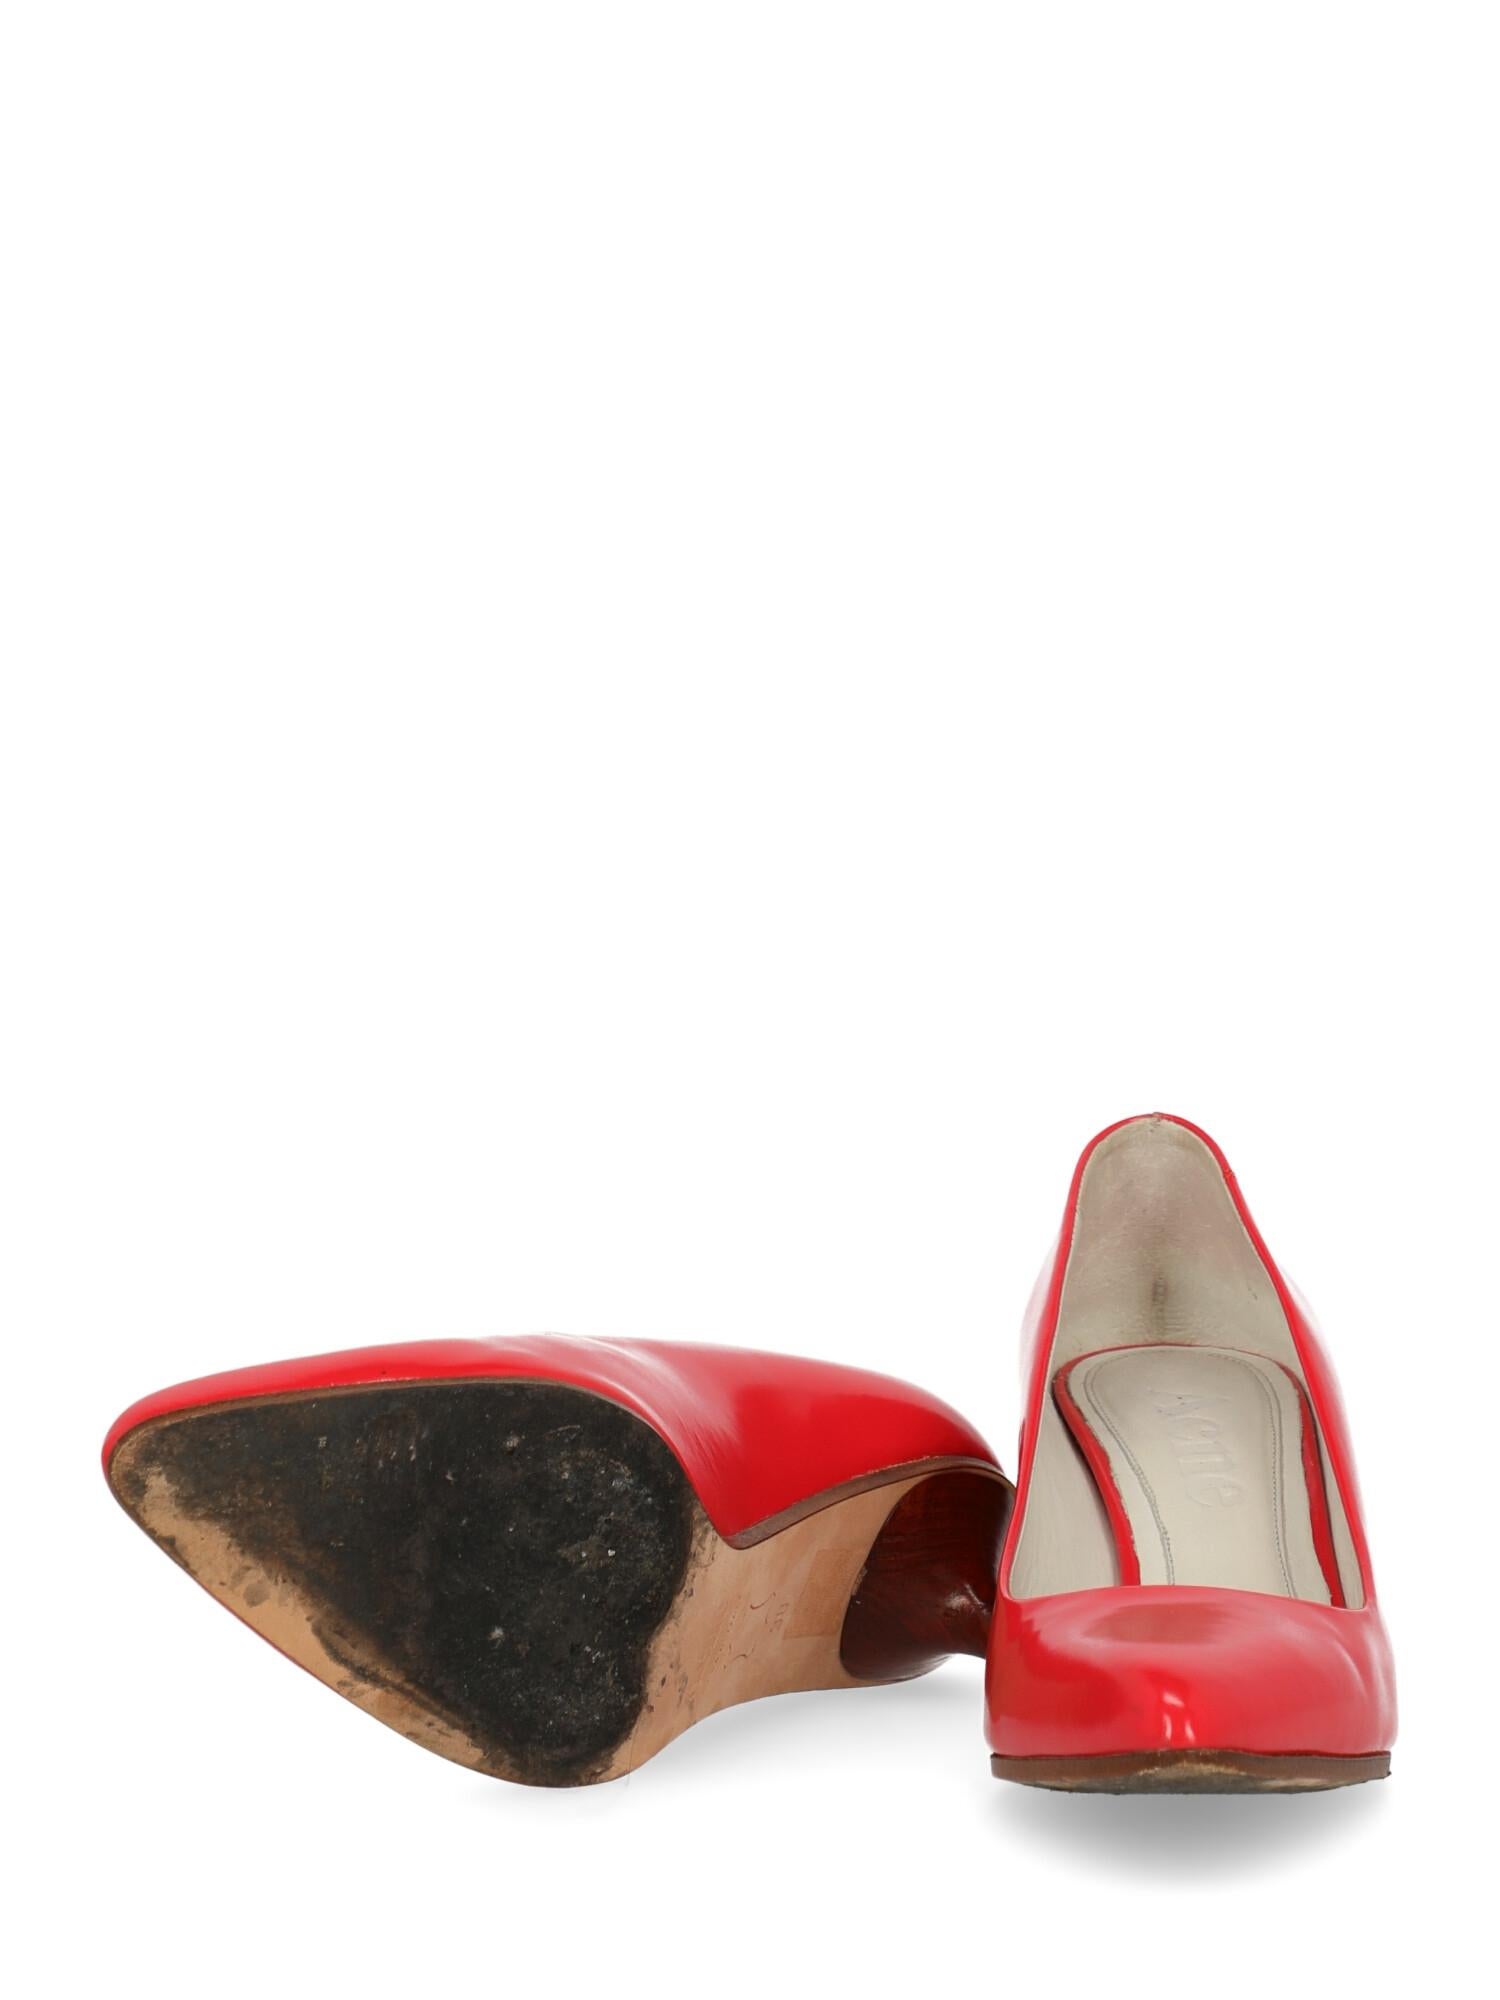 Women's Acne Studios Woman Pumps Red Leather IT 38 For Sale